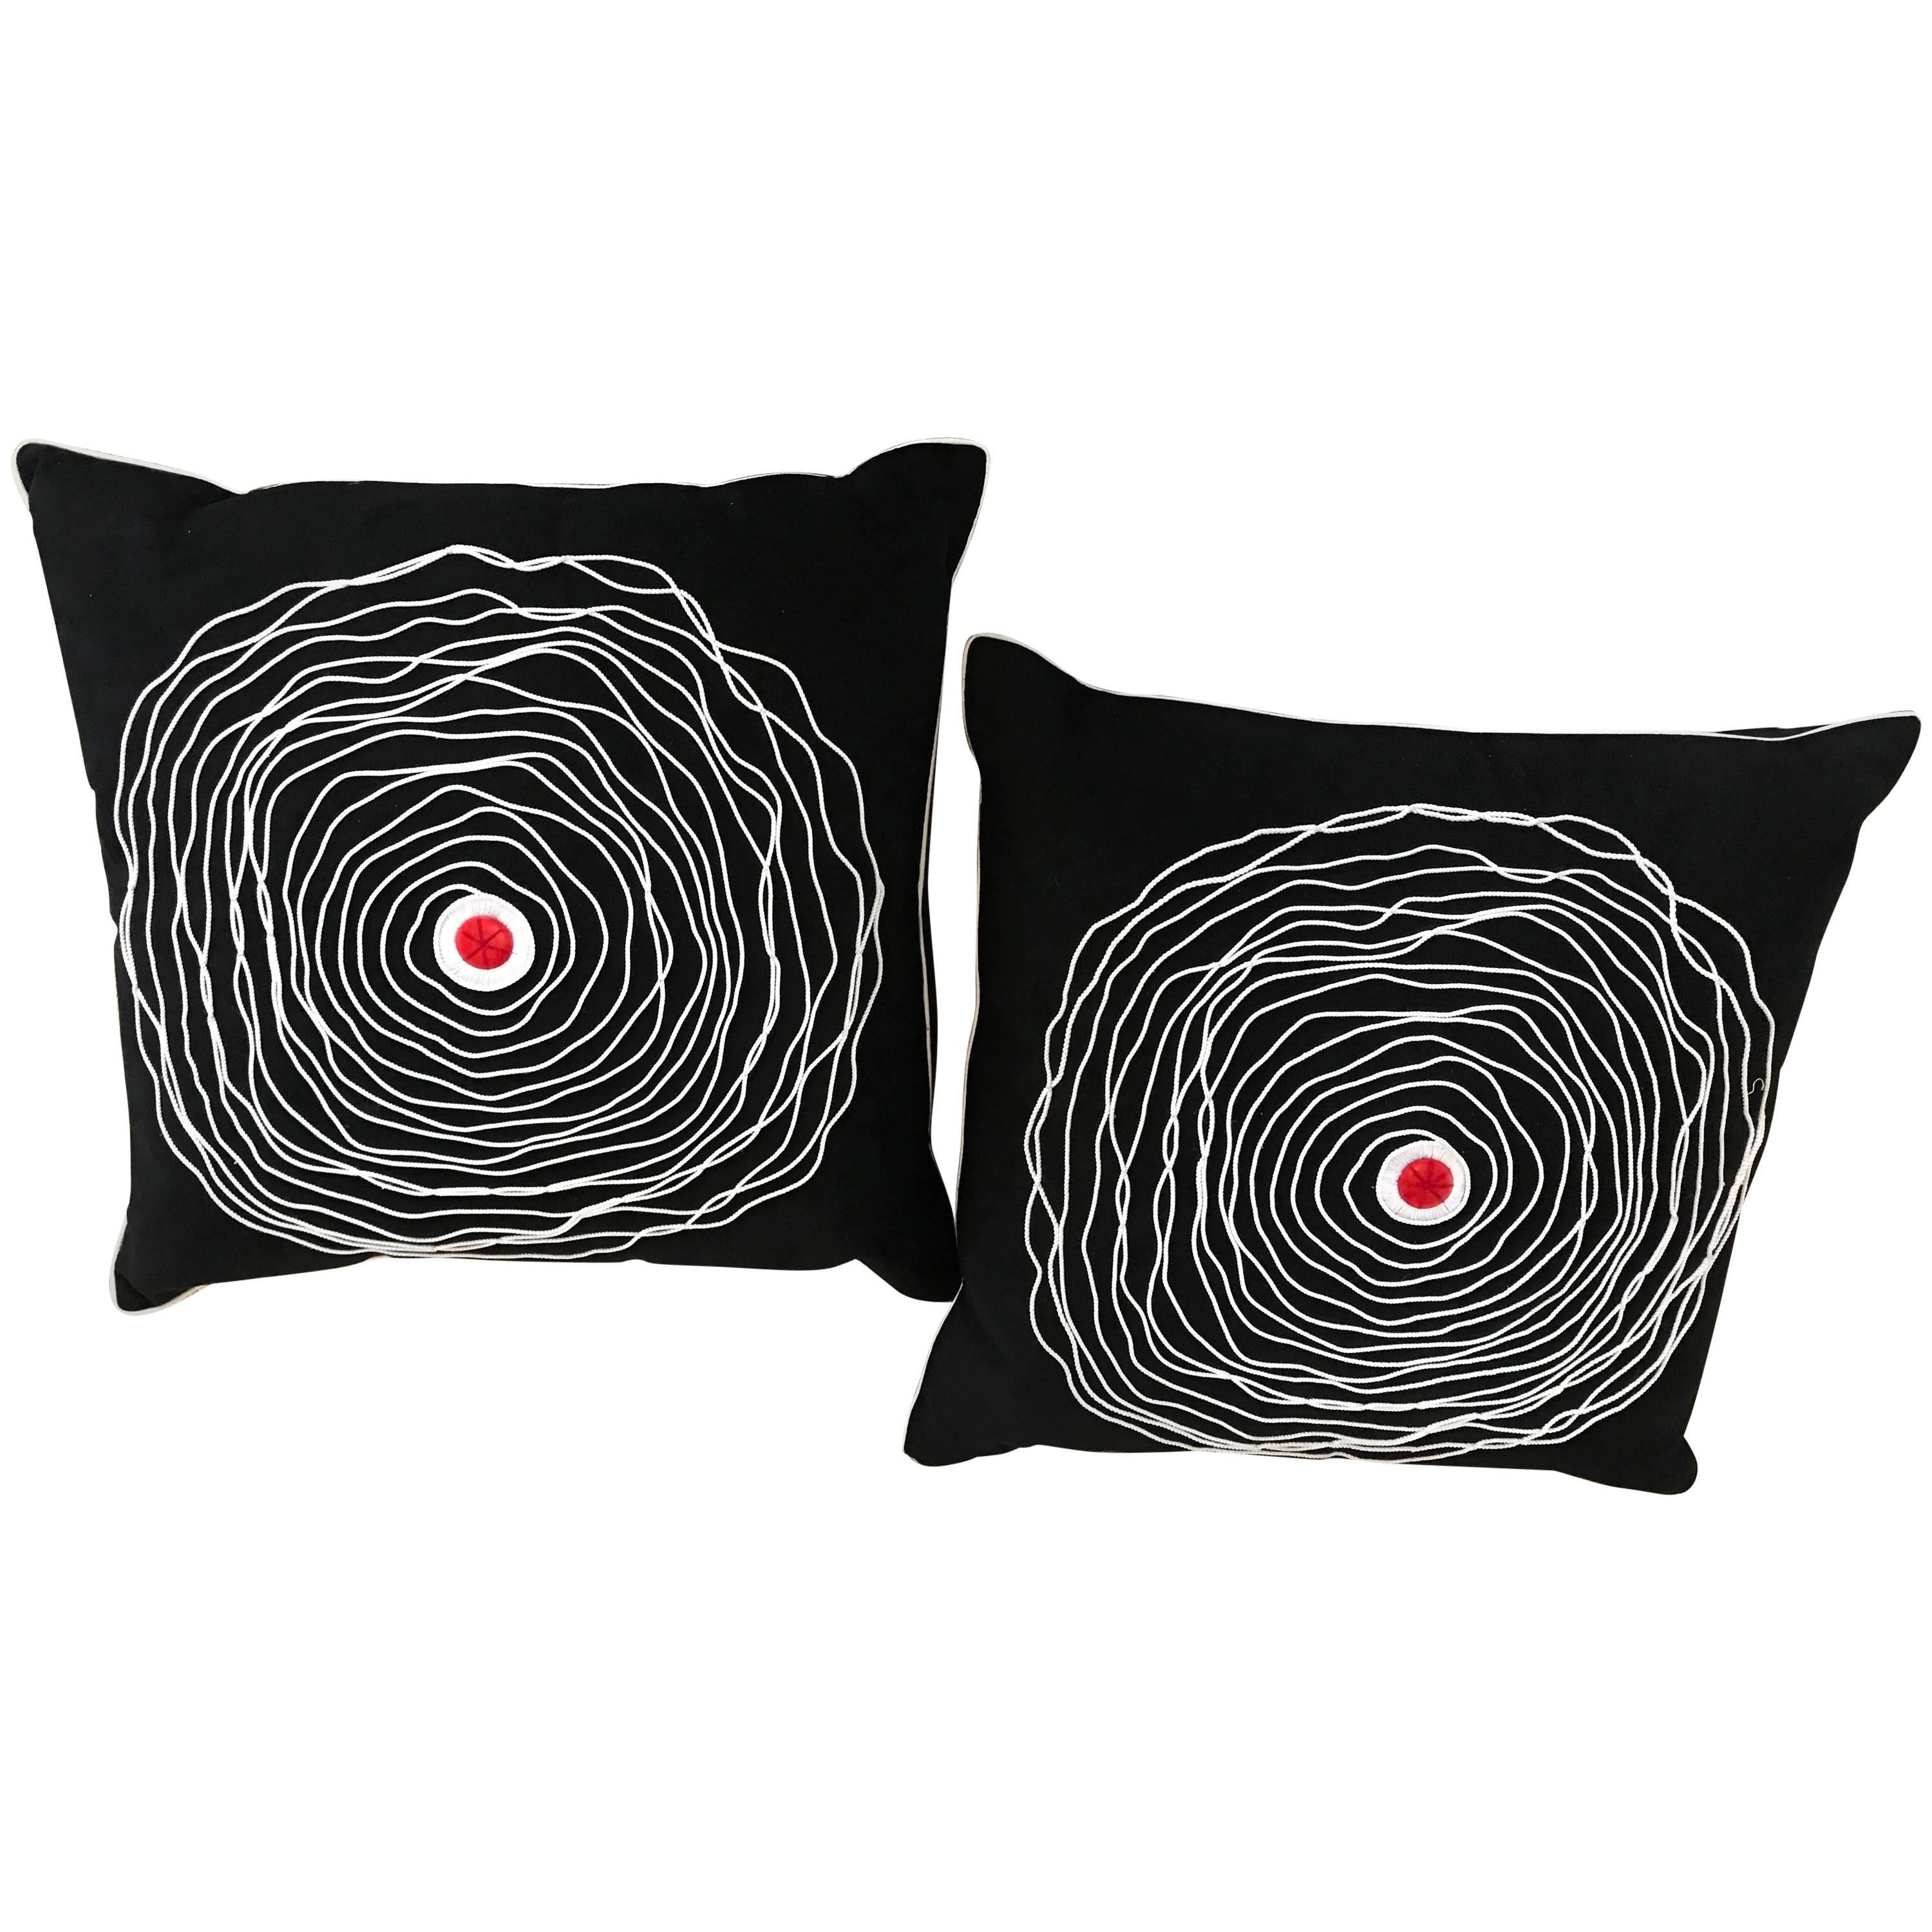 Pair of Black and White Modern Art Decorative Embroidered Cord Pillows For Sale